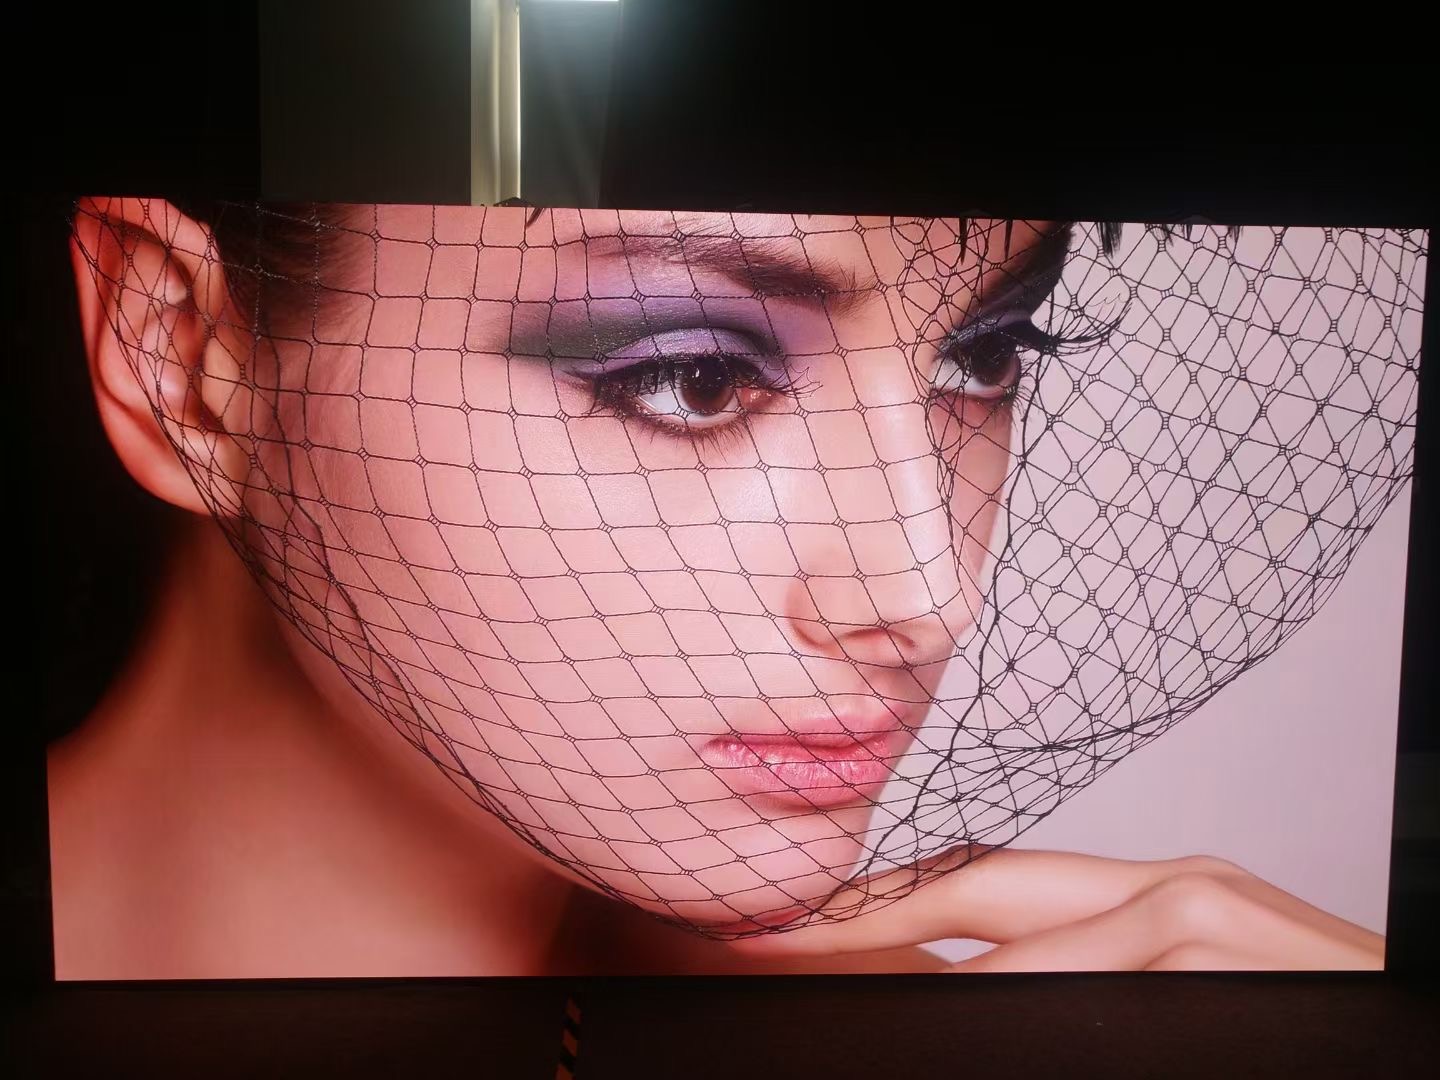 The LED video wall shows a picture of a beautiful woman.